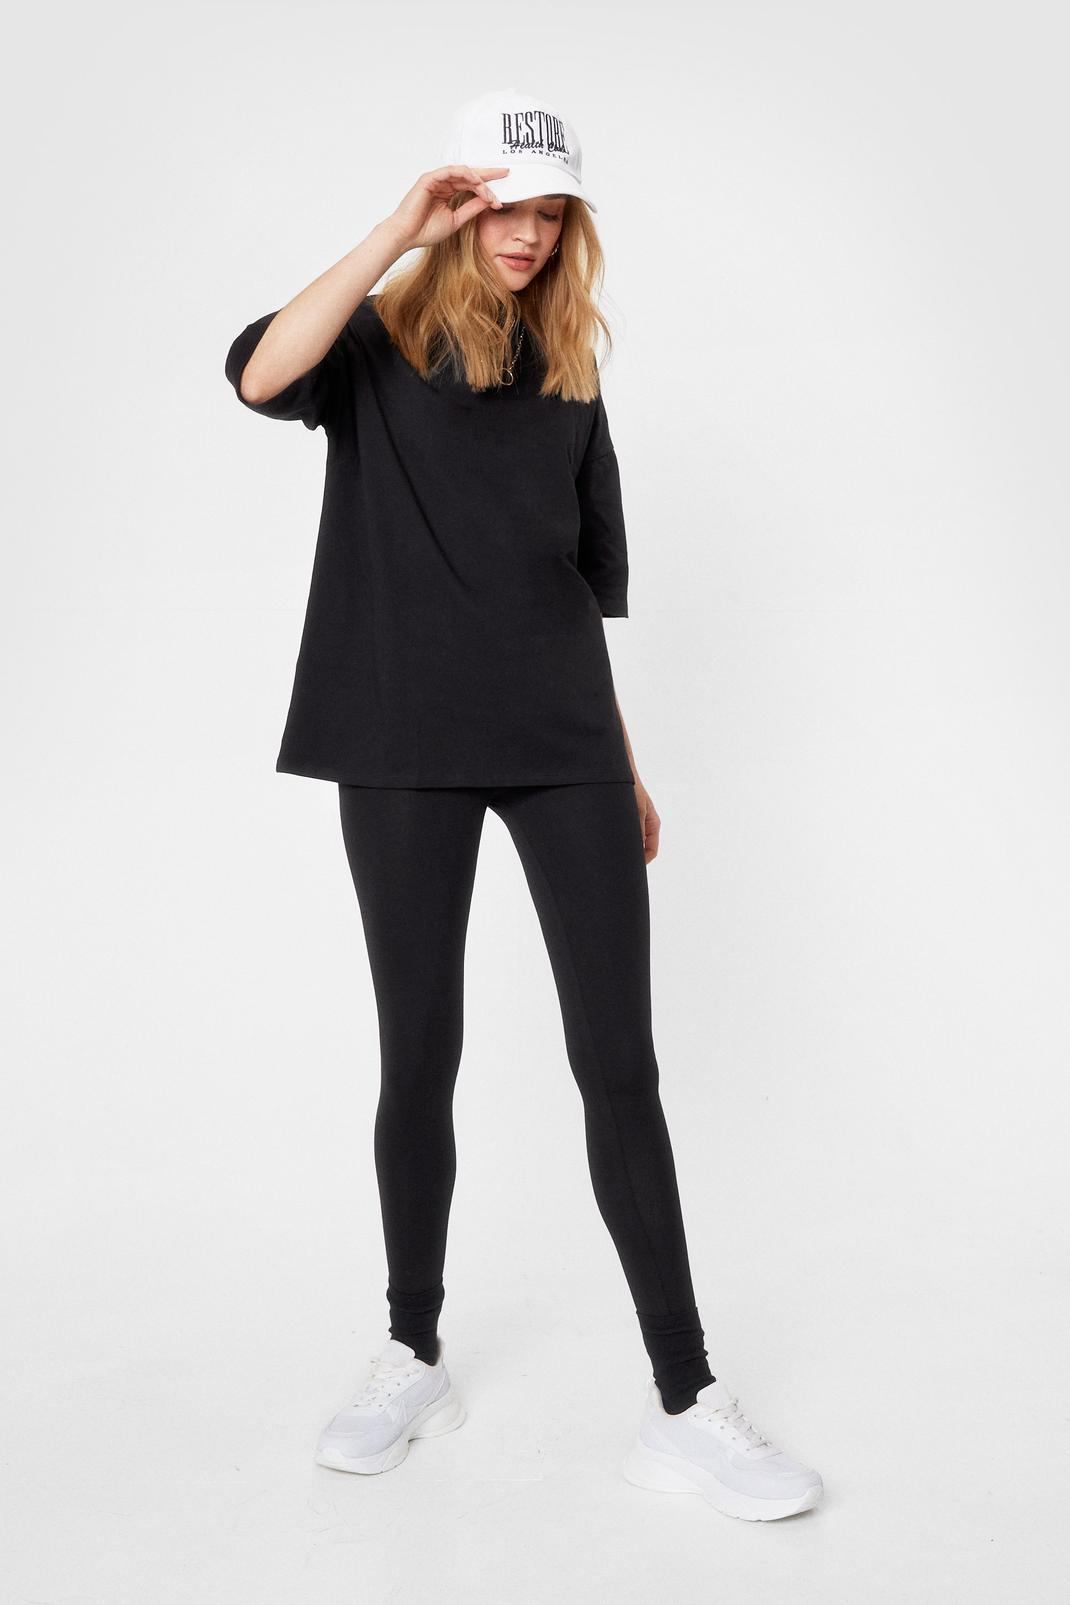 casual work outfits #oversized #tshirt #outfit #leggings *